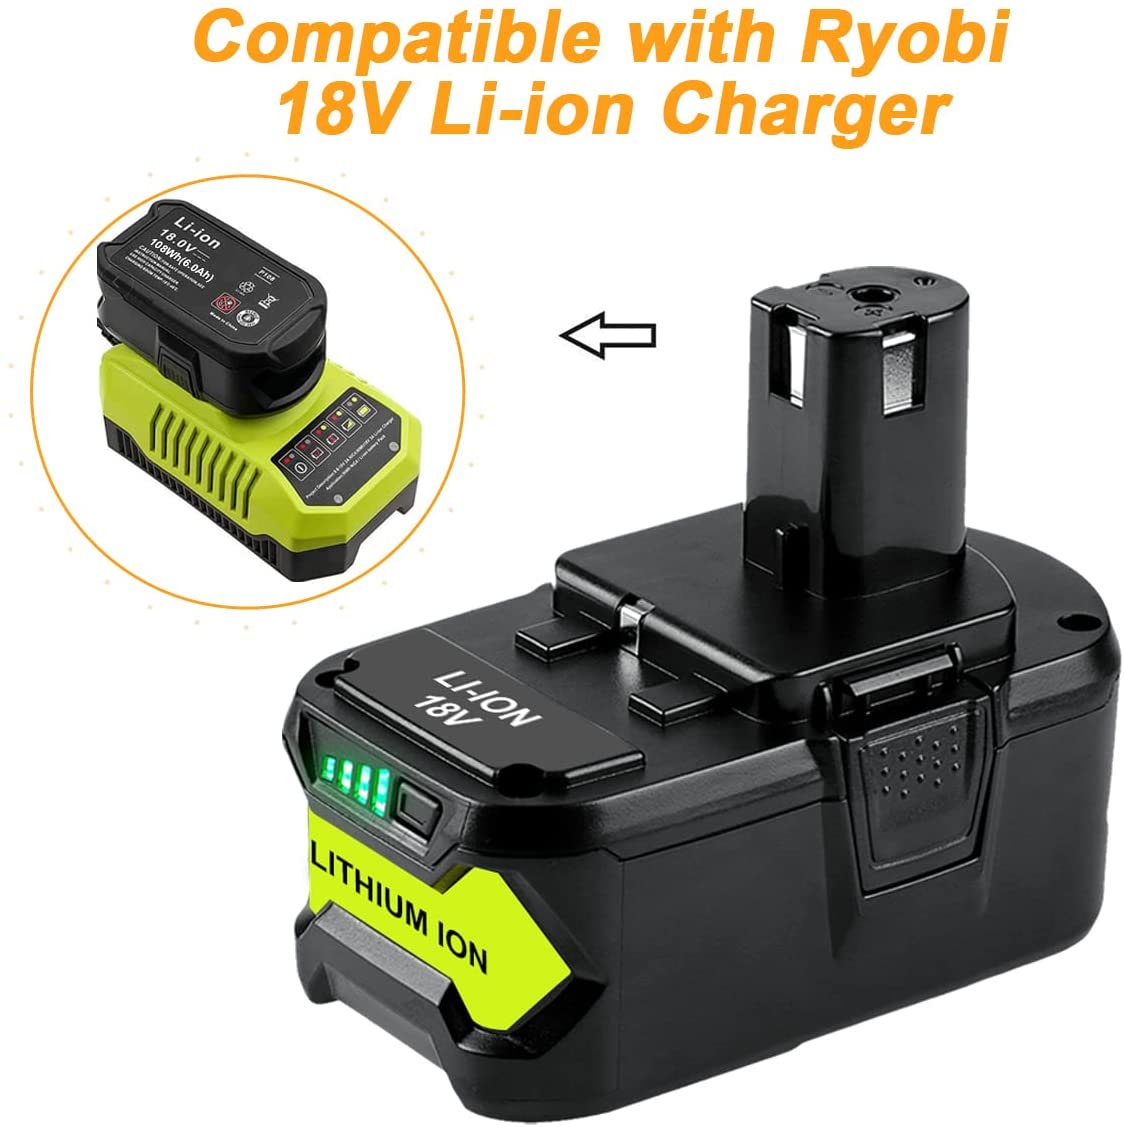 For Ryobi 18V Lithium Battery Replacement | P108 6.0Ah Li-ion Battery 2 Pack